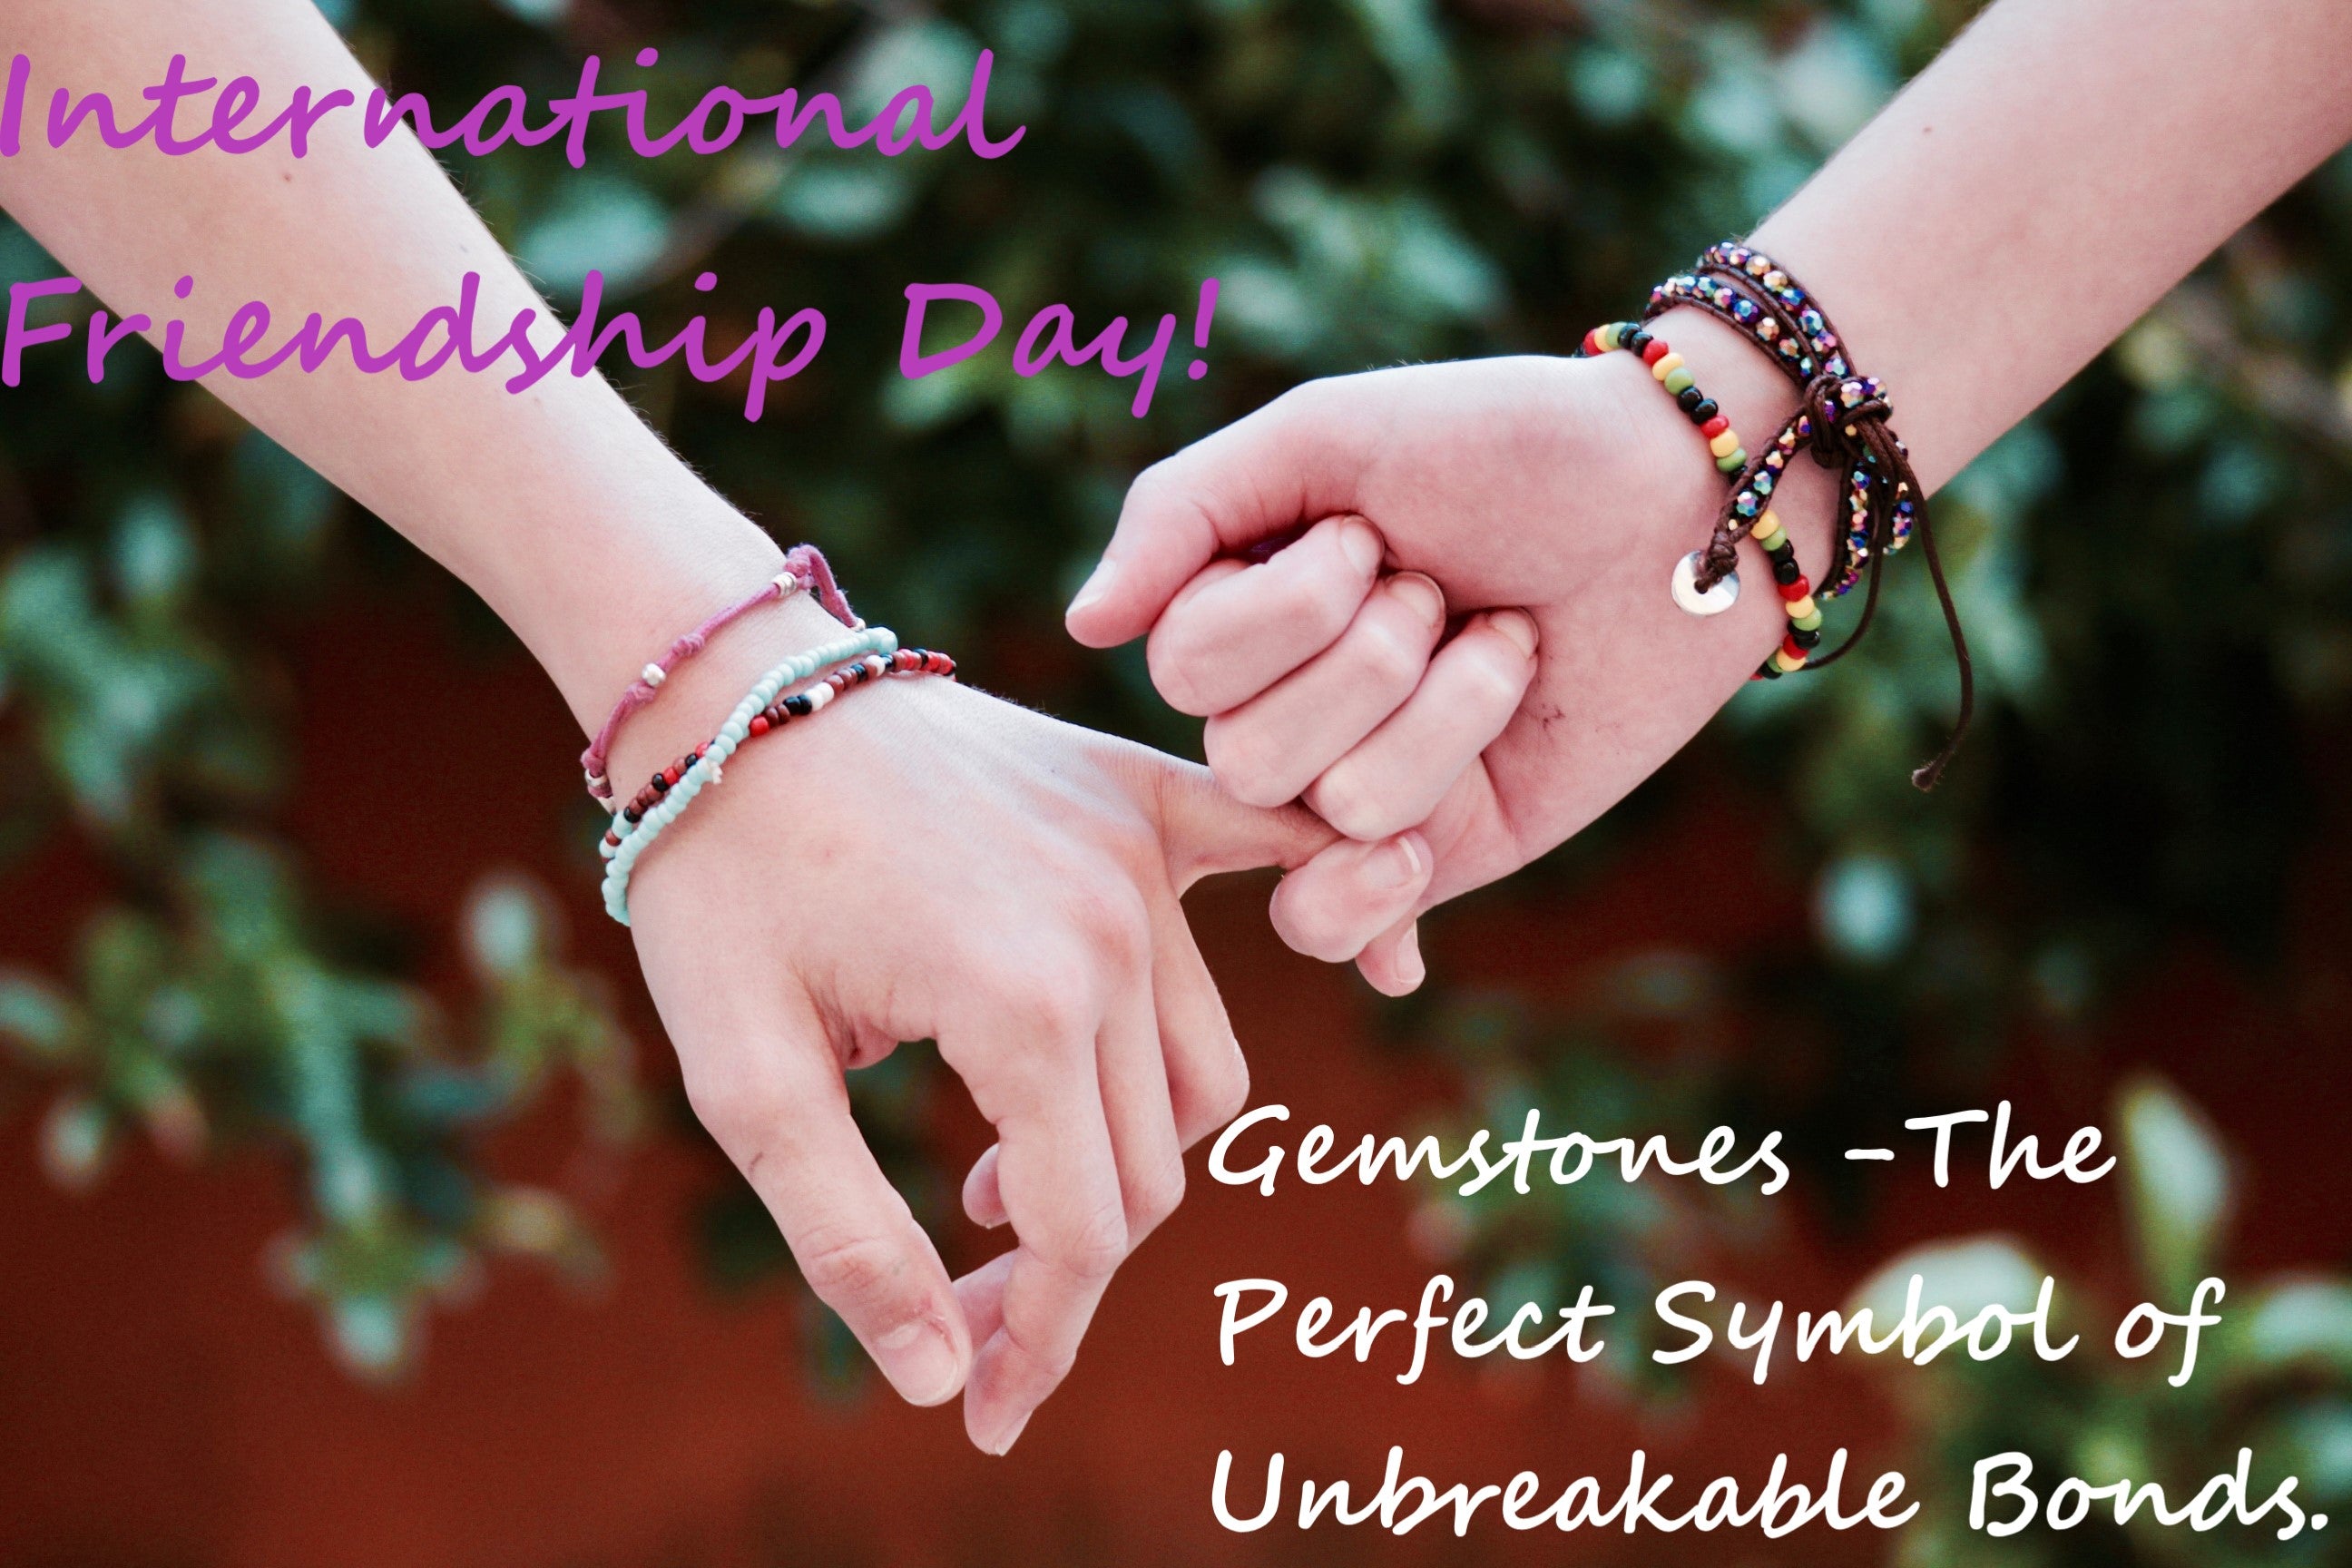 Article Cover Image Depicting Friendship 